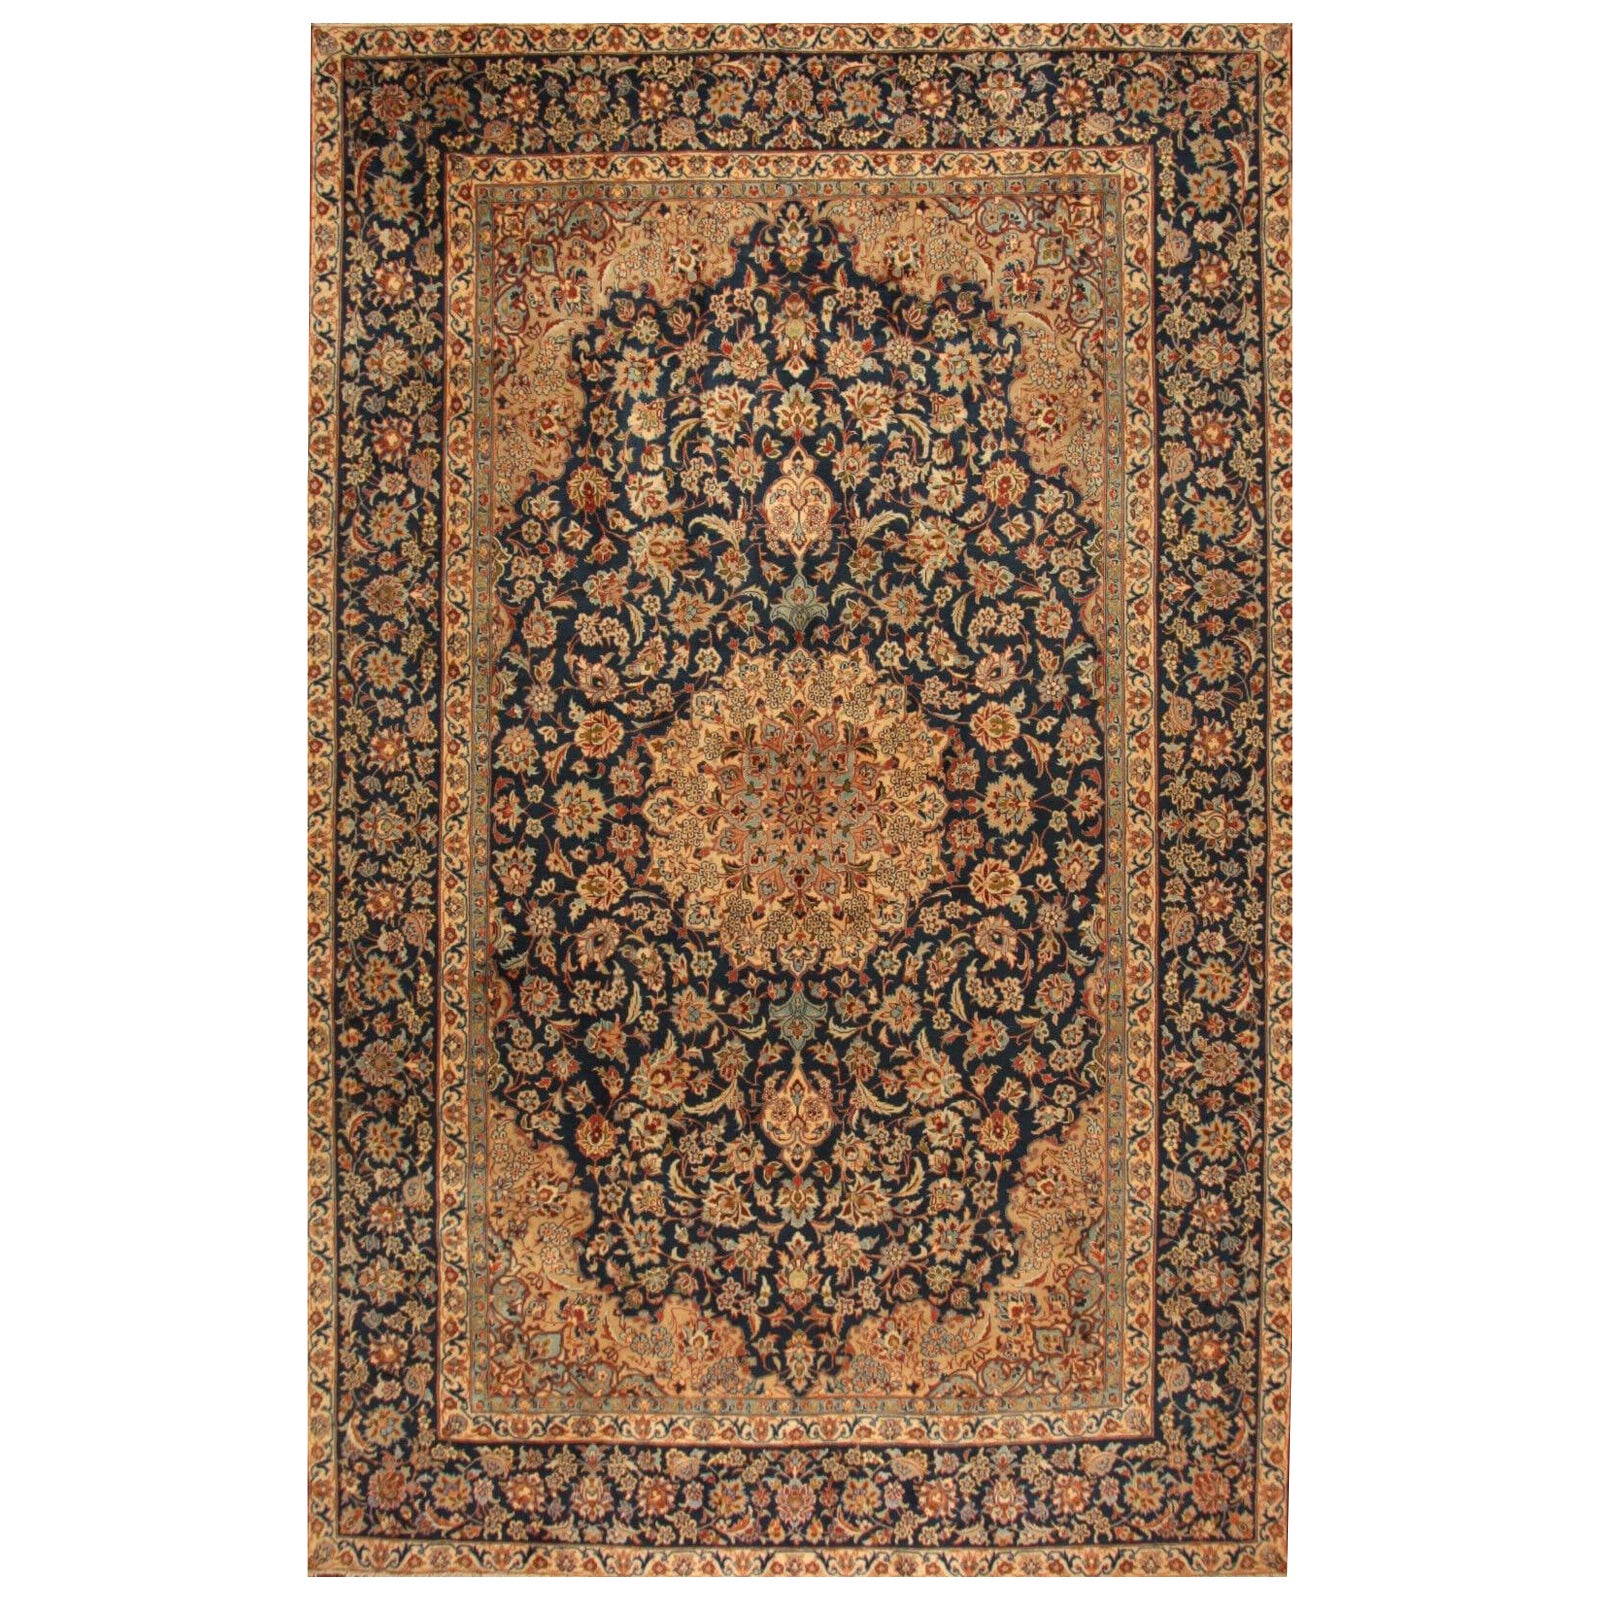 Handmade Vintage Persian Style Isfahan Rug 9.5' x 15', 1970s - 1T29 For Sale